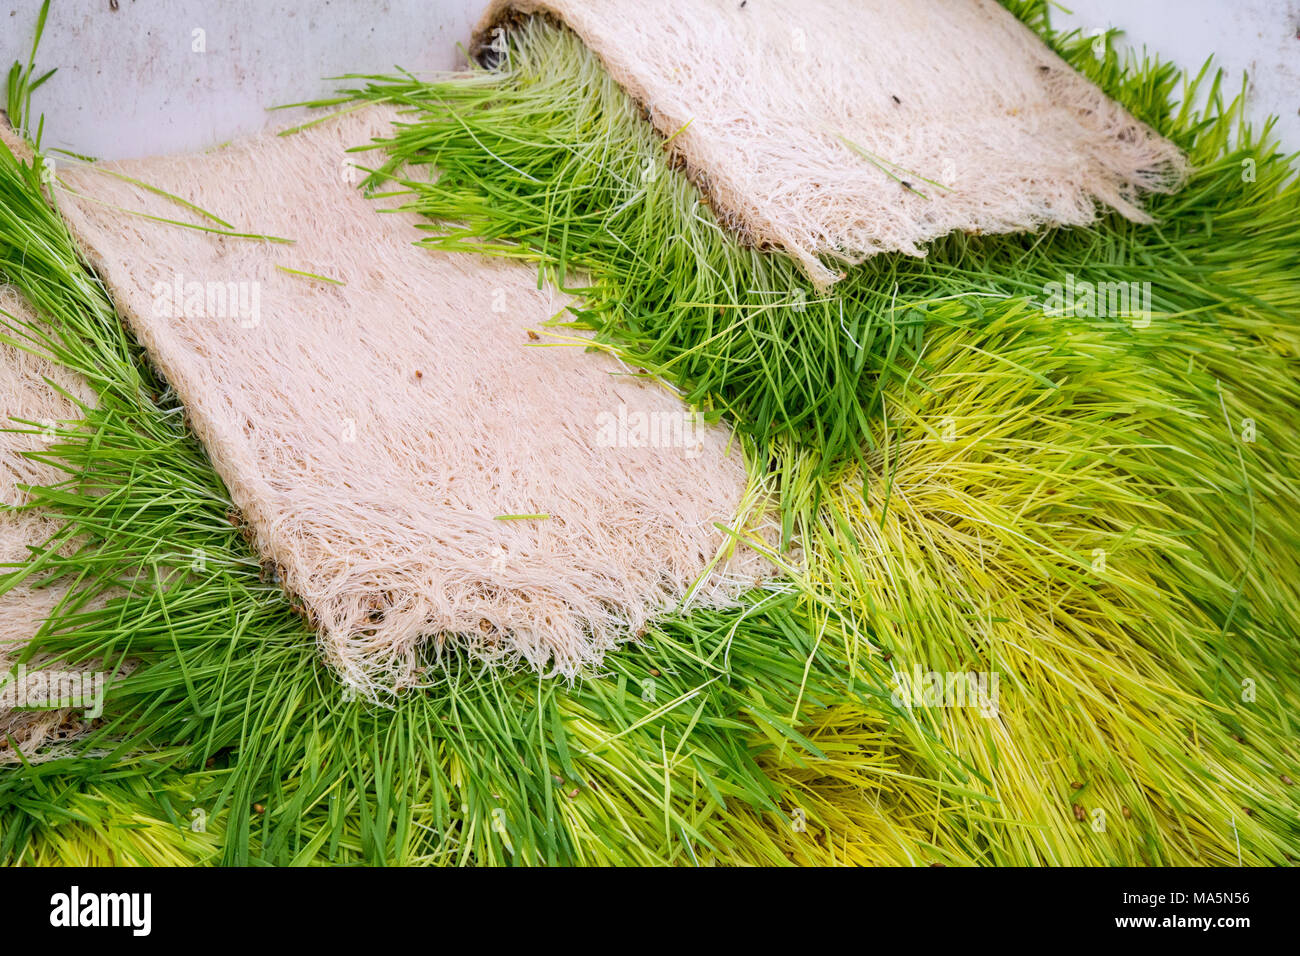 Hydroponic Agriculture.  Mats of Barley Grown Hydroponically. Dyersville, Iowa, USA. Stock Photo